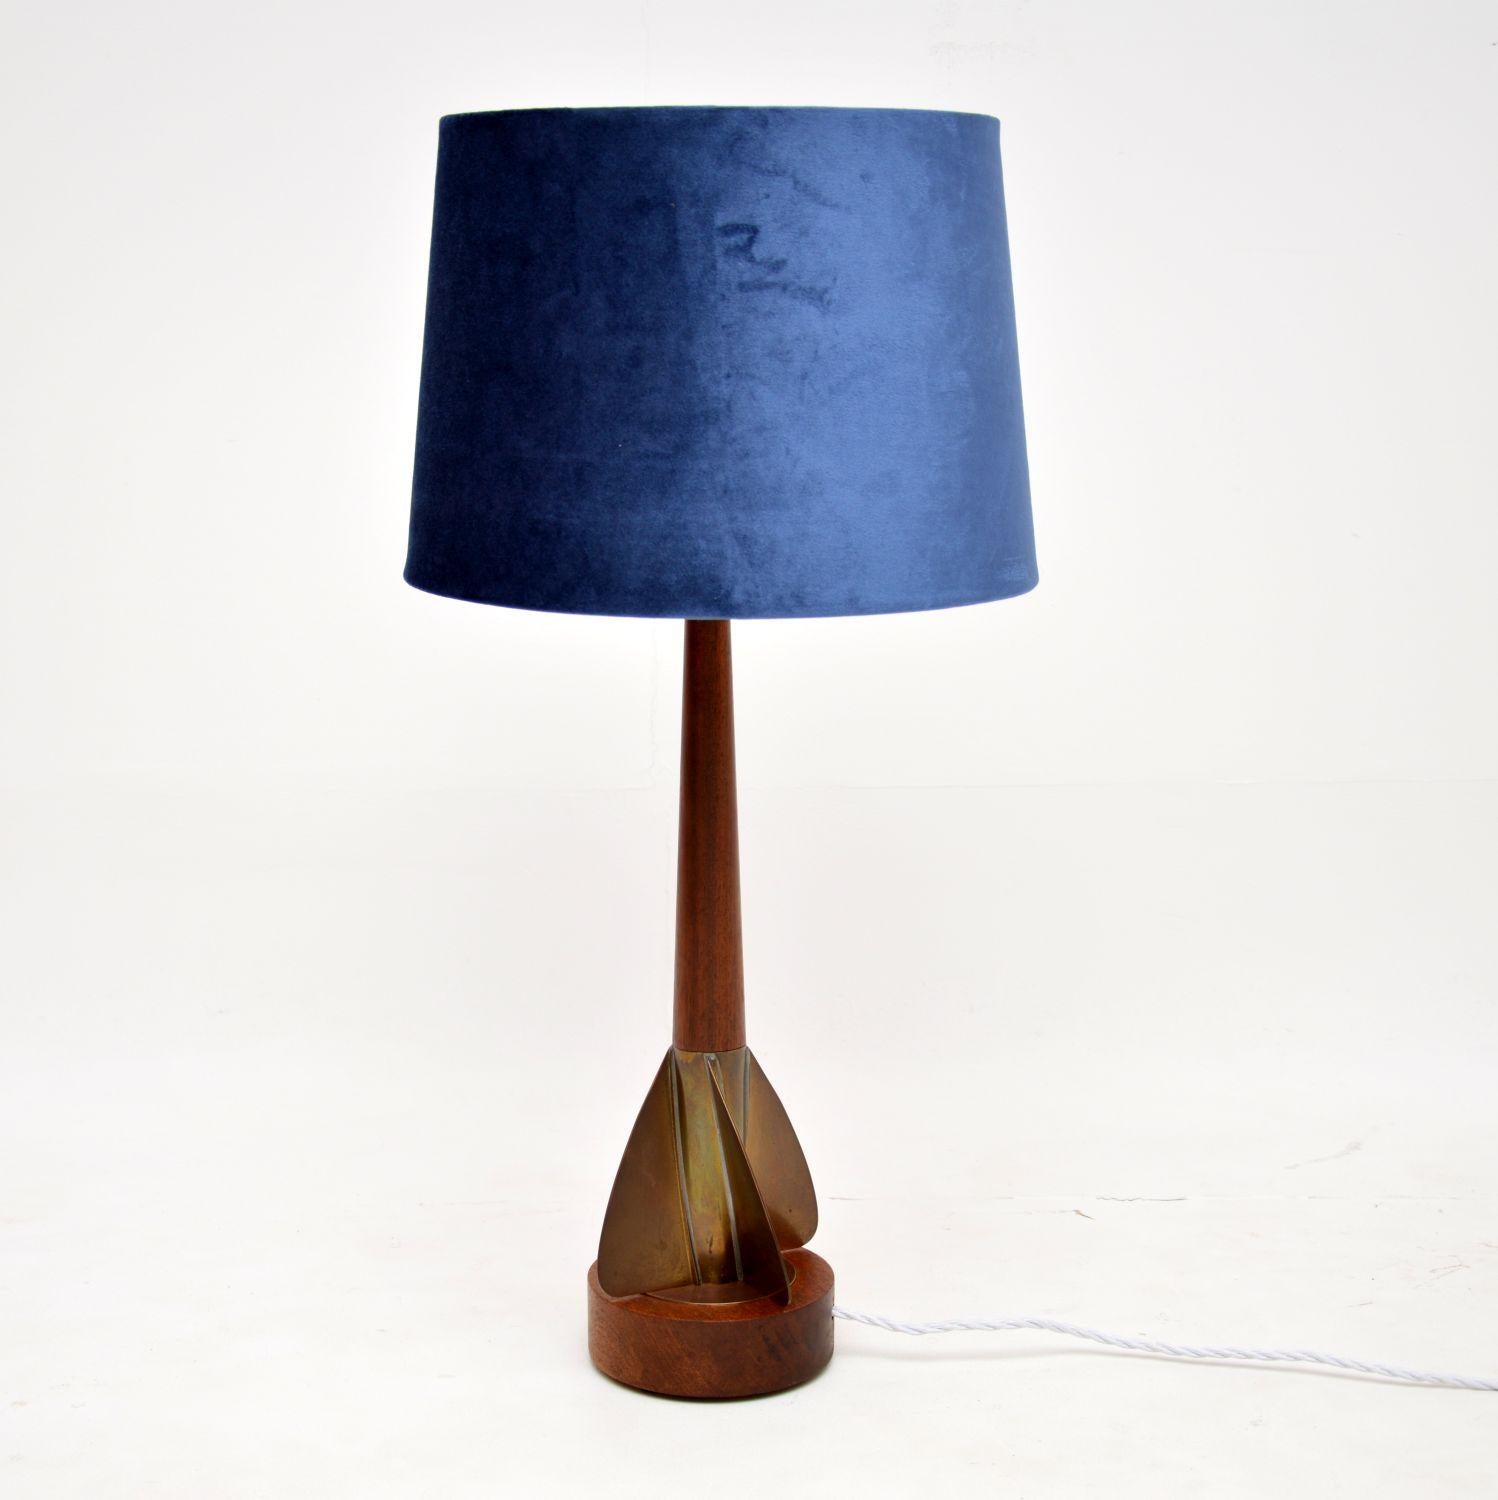 A very unusual and stylish vintage table lamp in solid teak and brass. This was made in England, it dates from the 1960’s.

It has an interesting brass propeller shaped base, this has the overall look and design of a rocket, reflecting the space